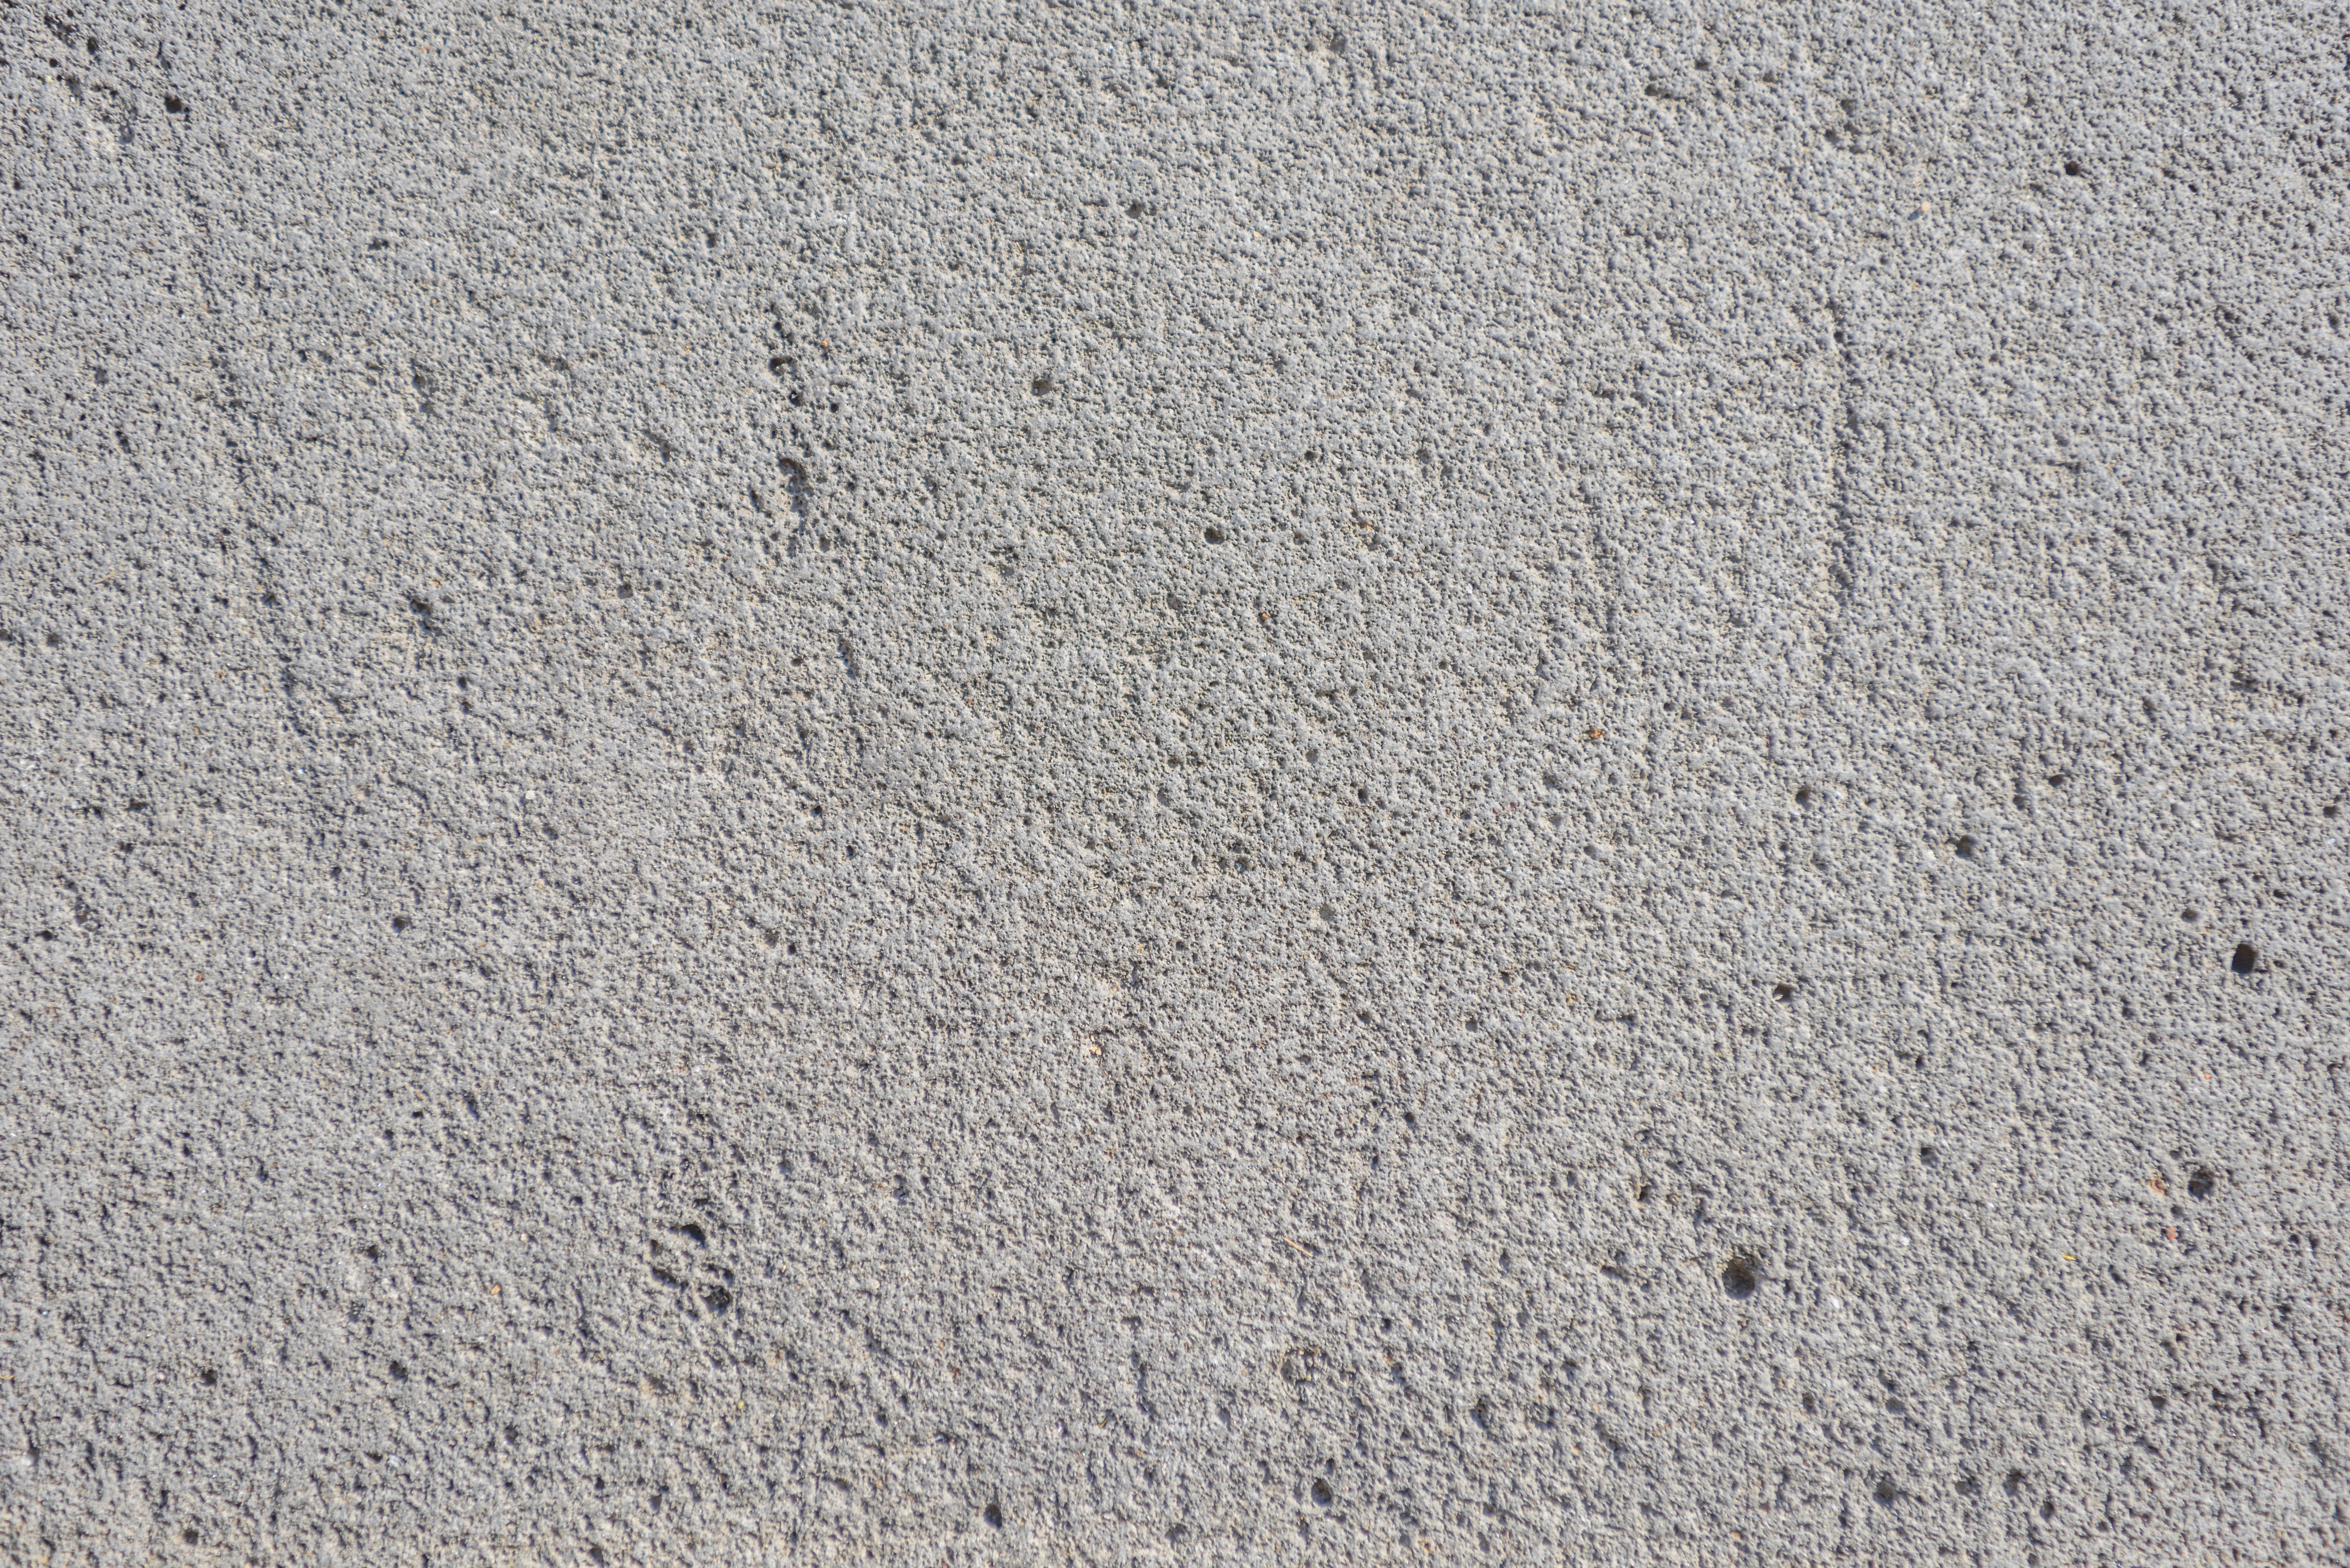 Settled Concrete- The picture shows a close-up aerial view of a part of settled concrete.